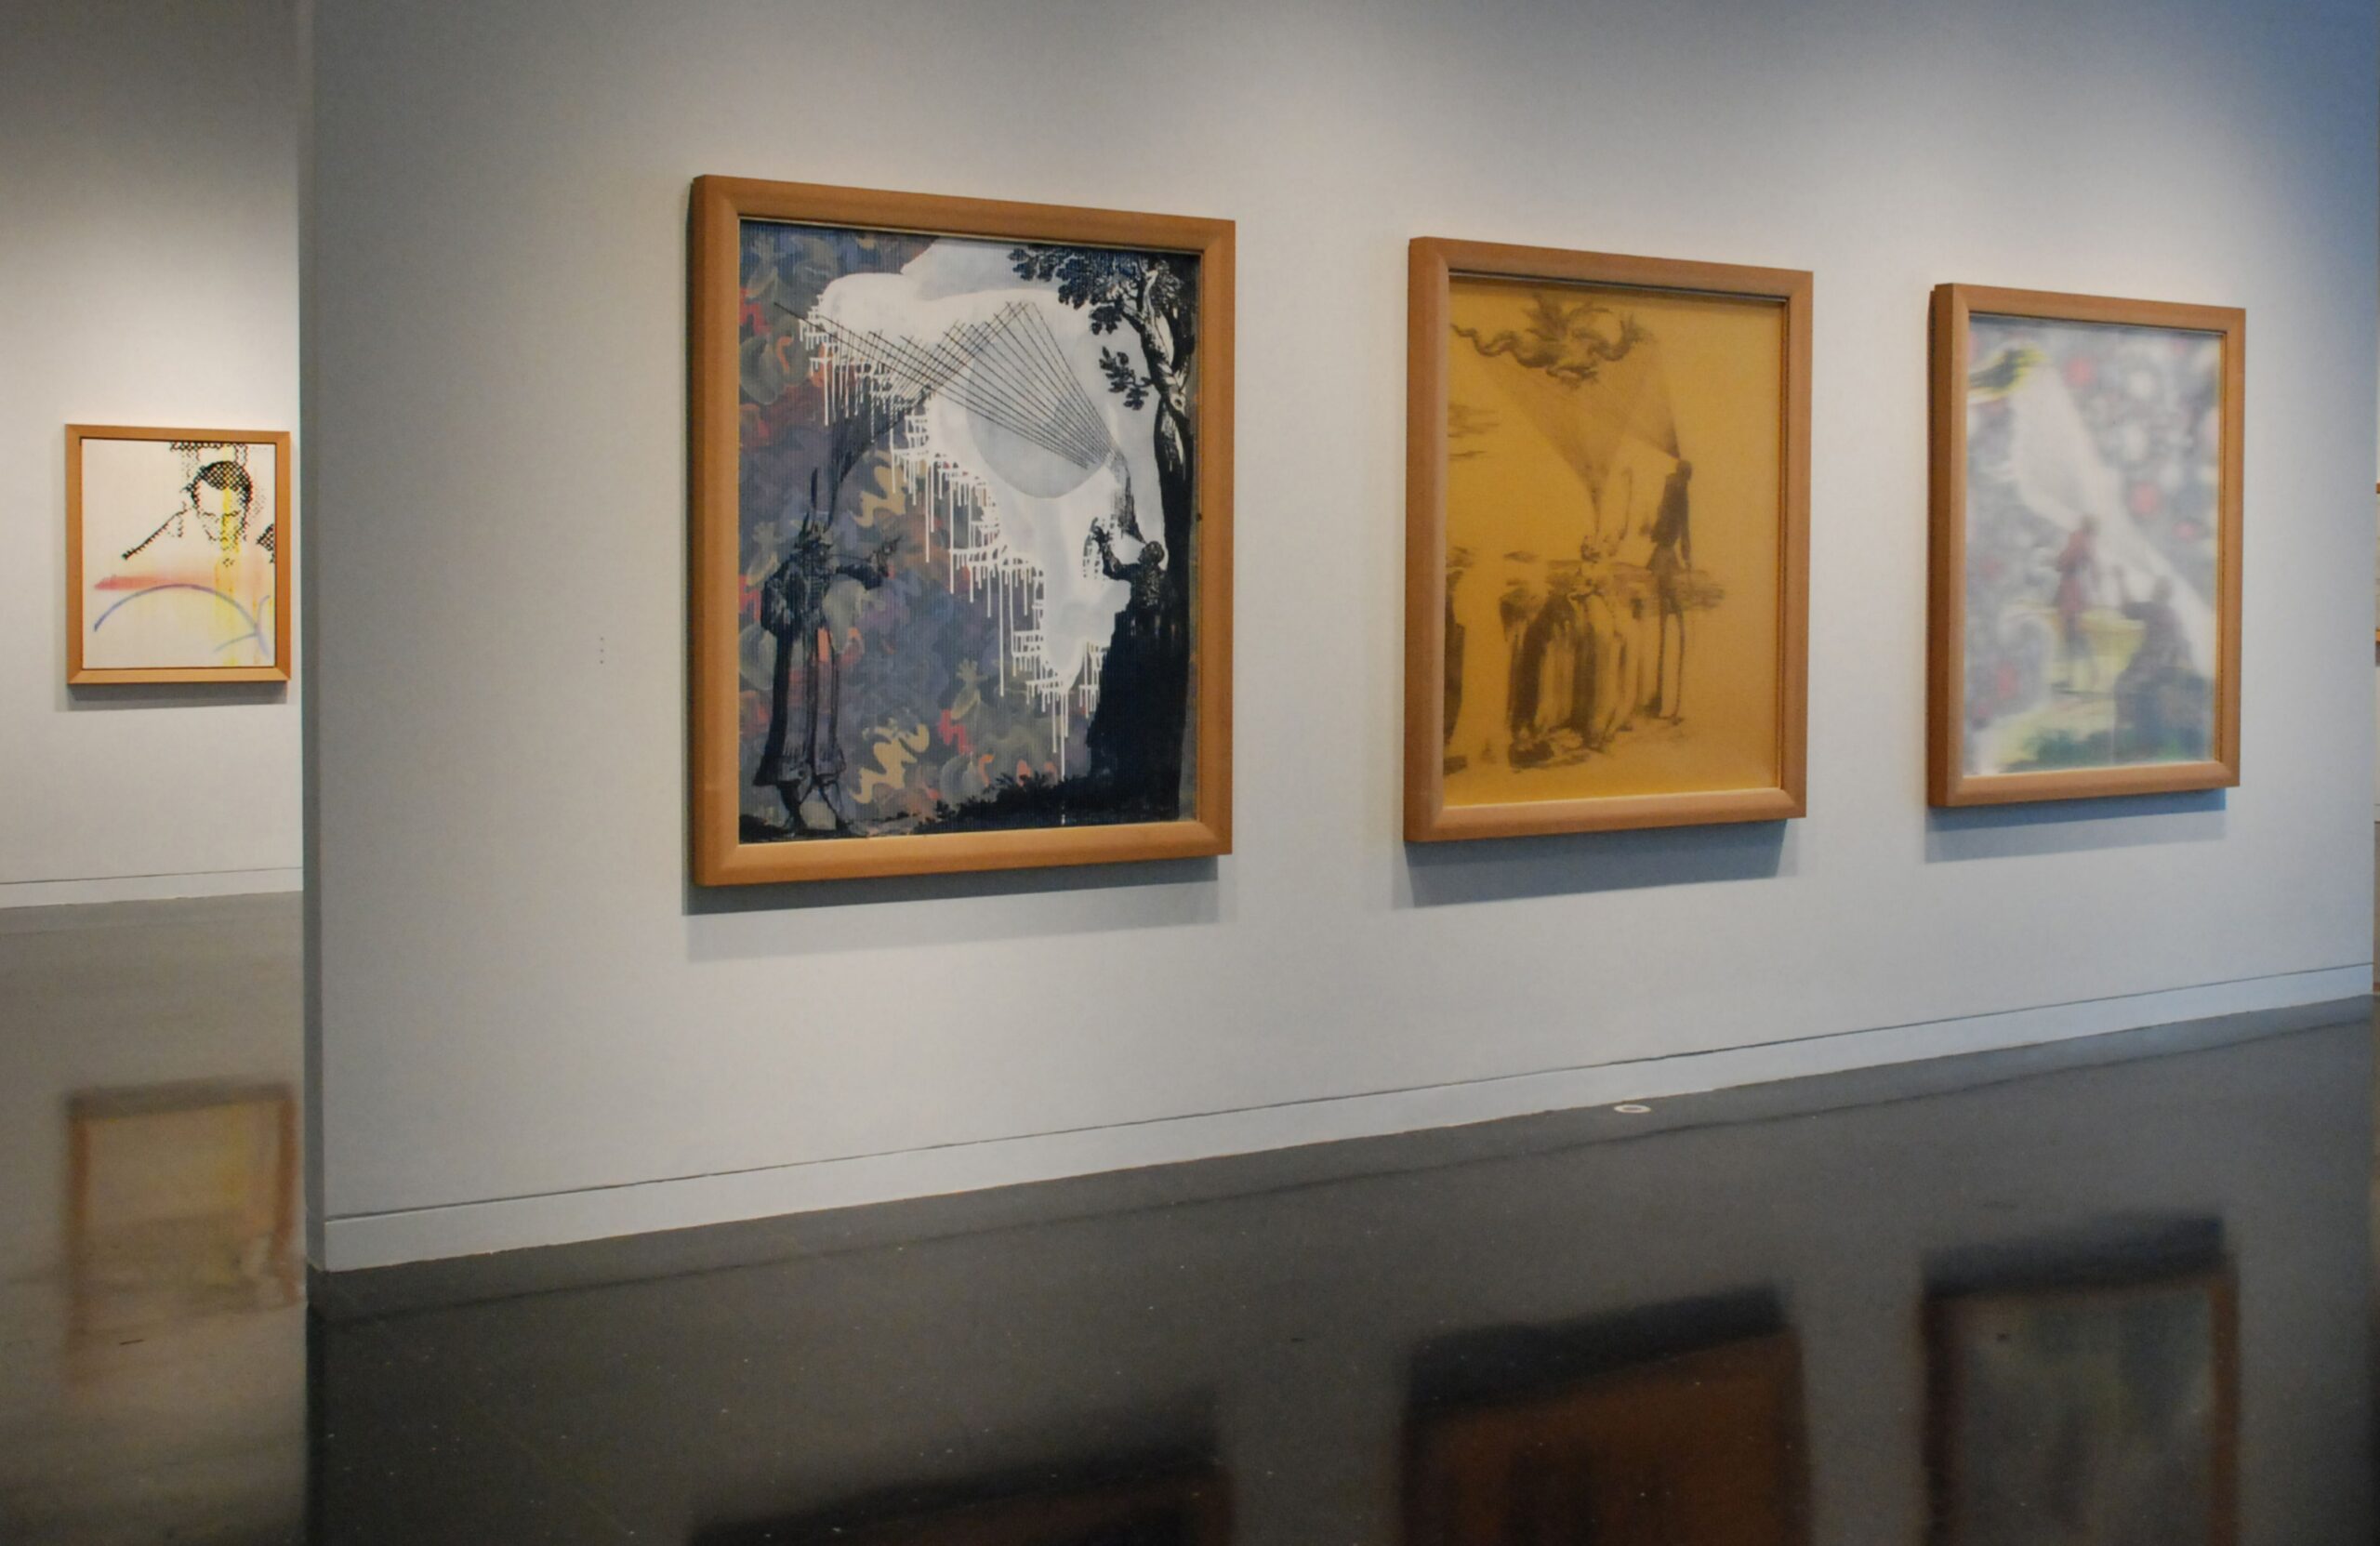 A freestanding, white gallery wall with three collages in wood frames installed in a row. Another framed image is visible in the gallery behind the wall.